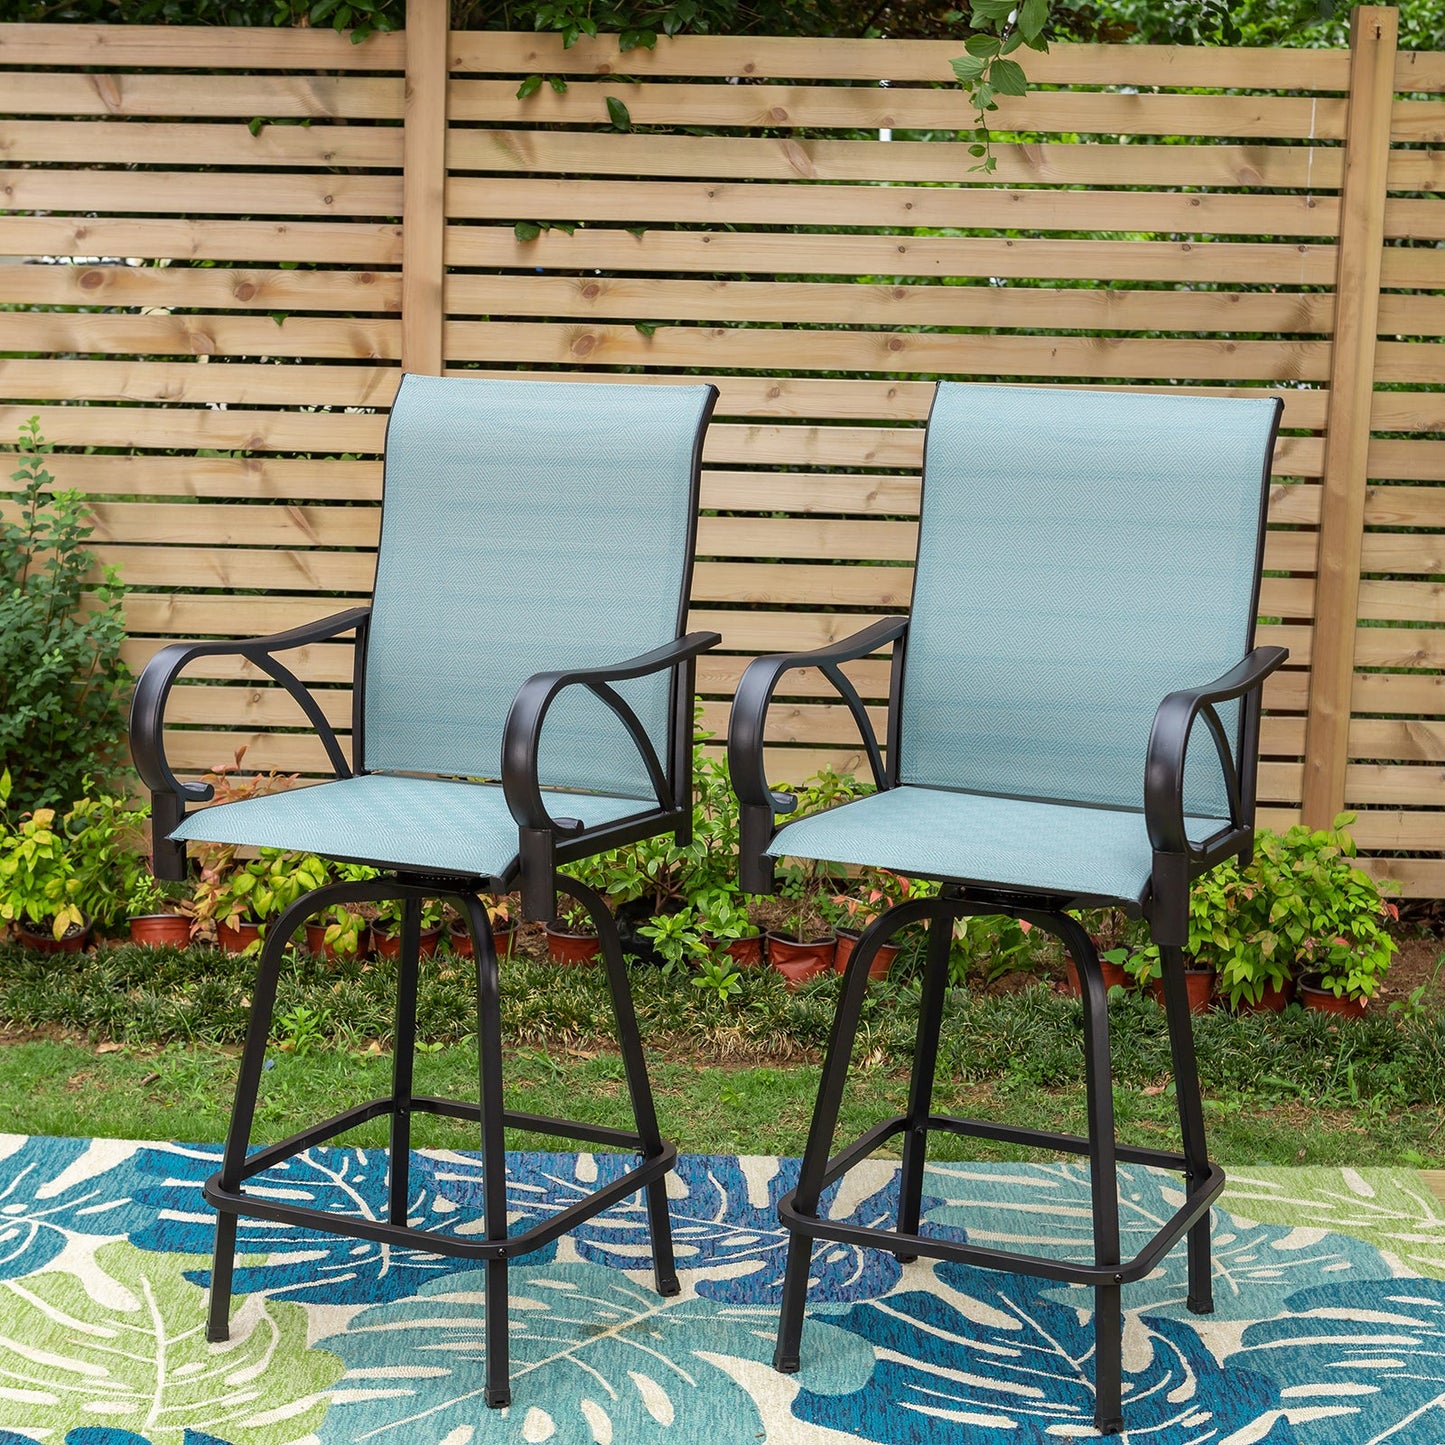 Sophia & William 2 Piece Outdoor Swivel Bar Stools High Patio Chairs with Textilene Seat-Blue